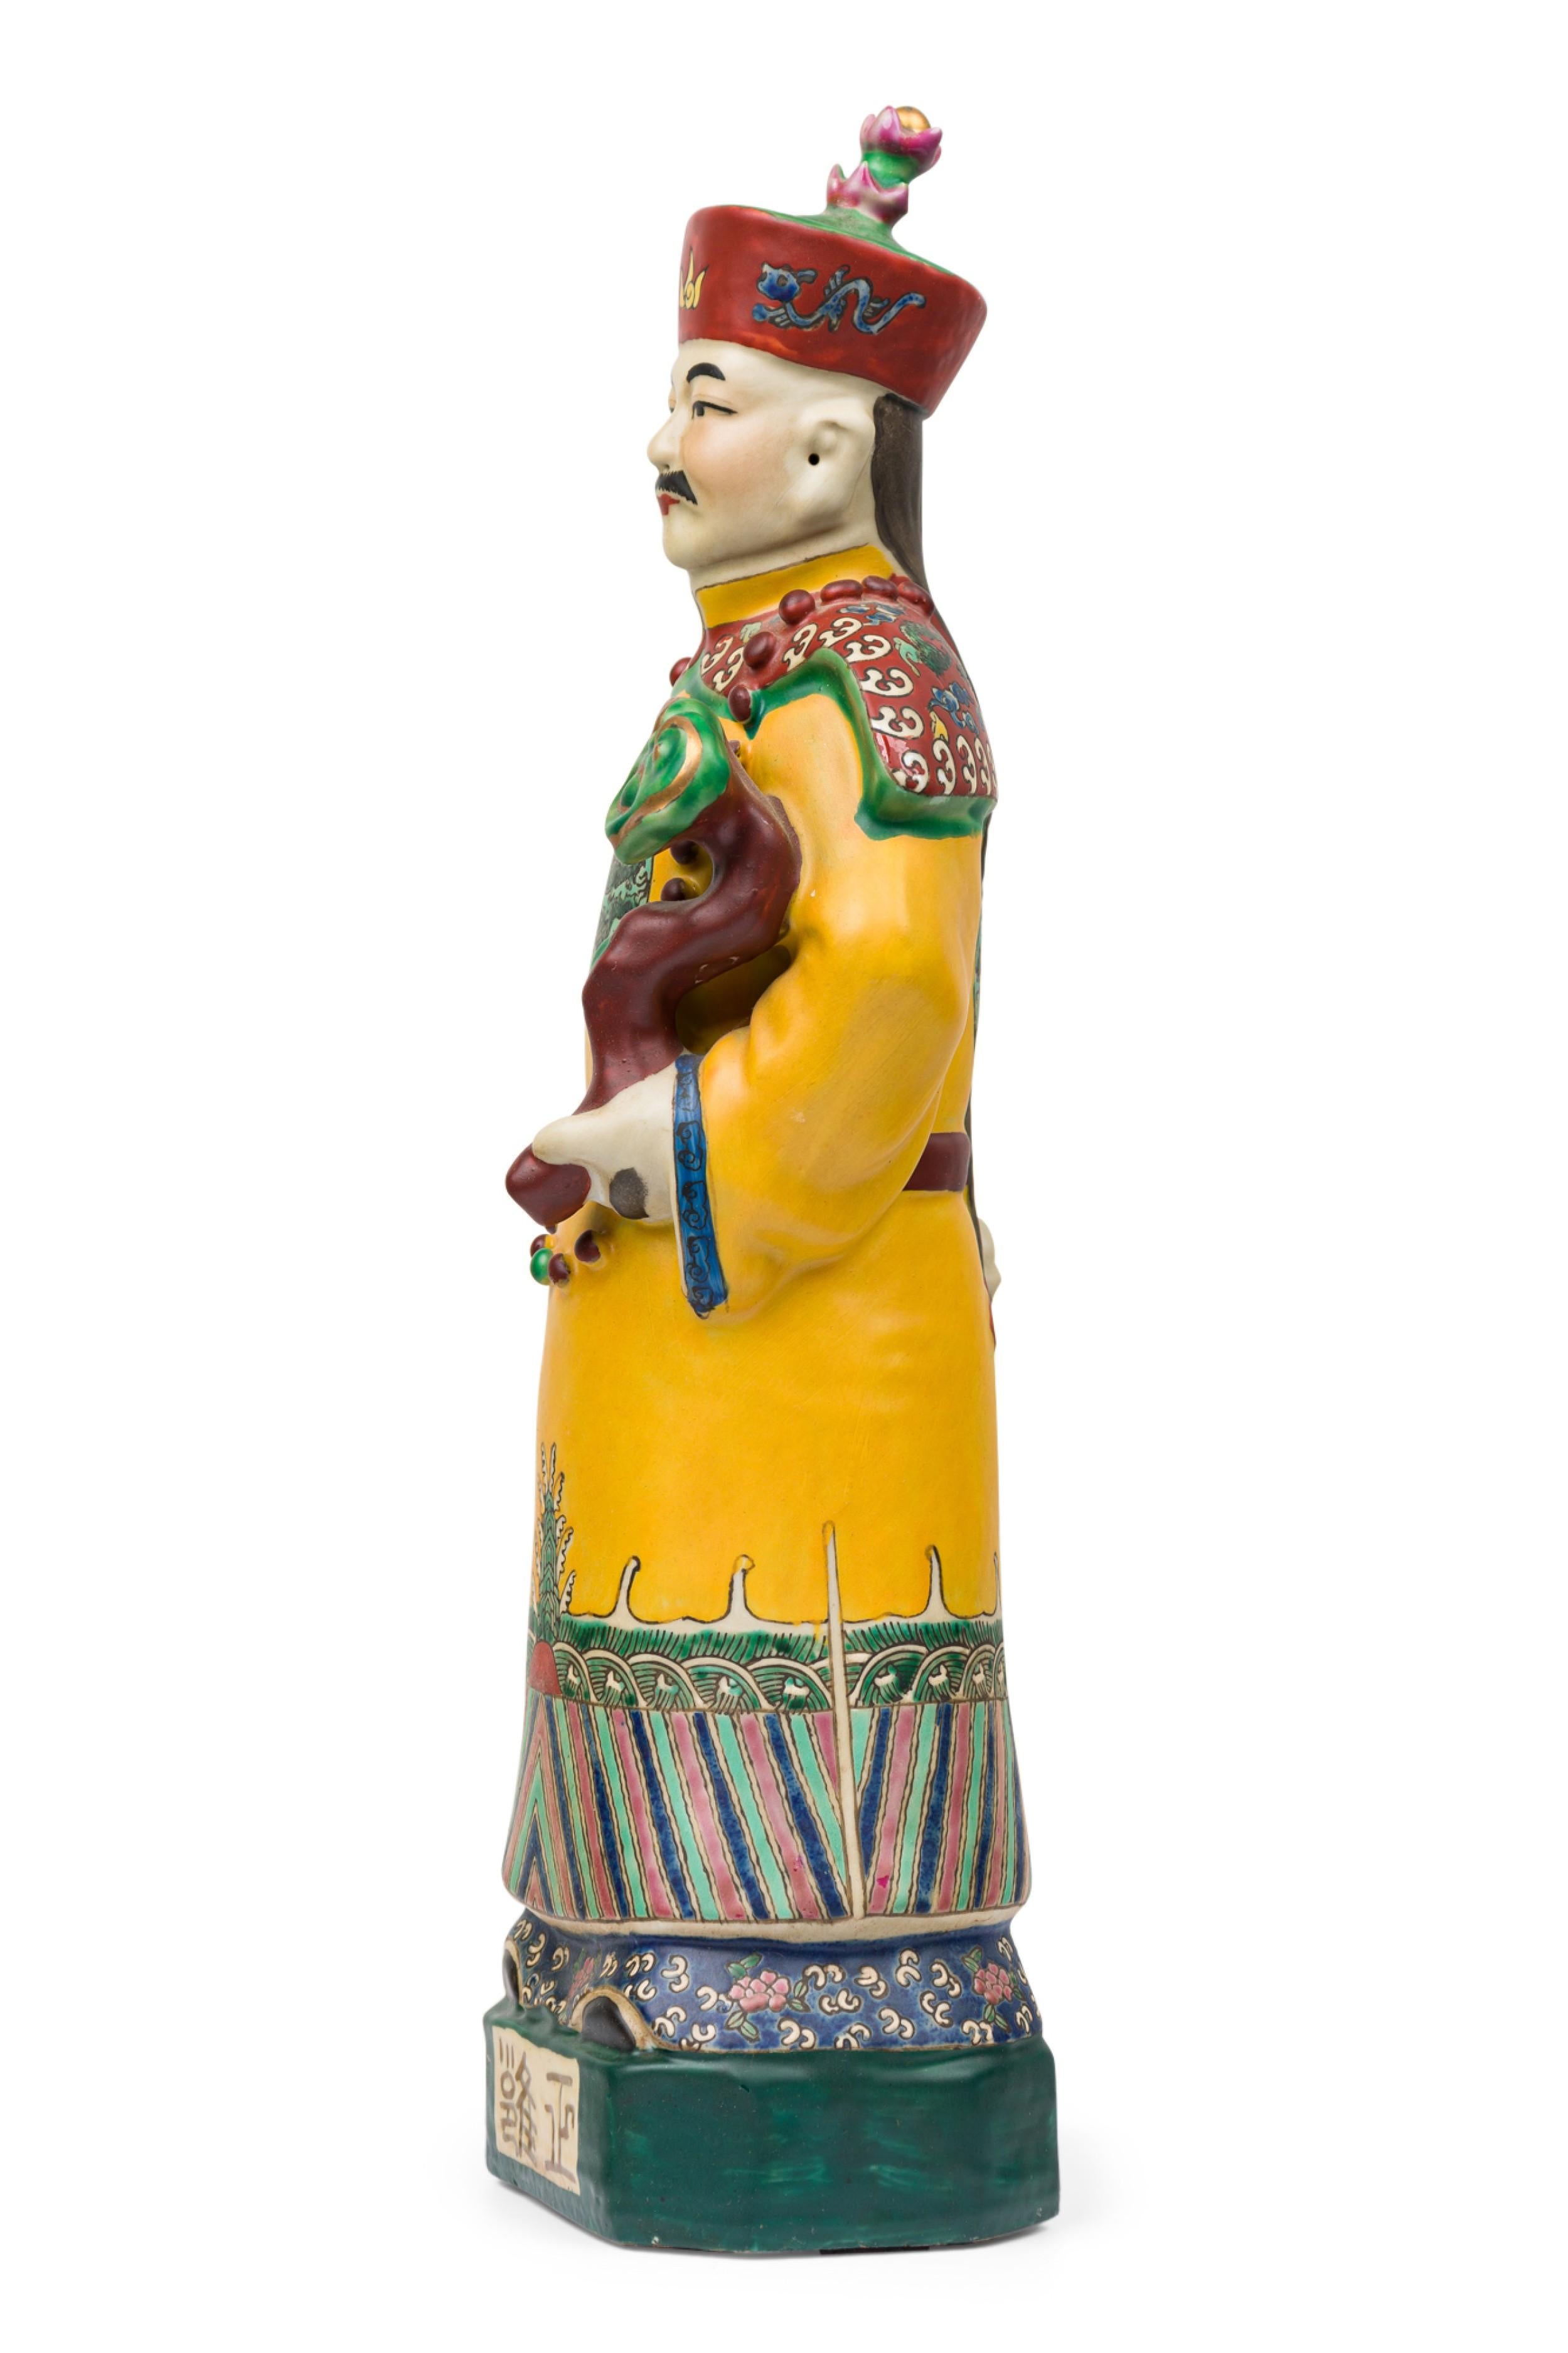 Pair of Chinese Painted Ceramic Figures Depicting a Yellow Robed Emperor For Sale 12